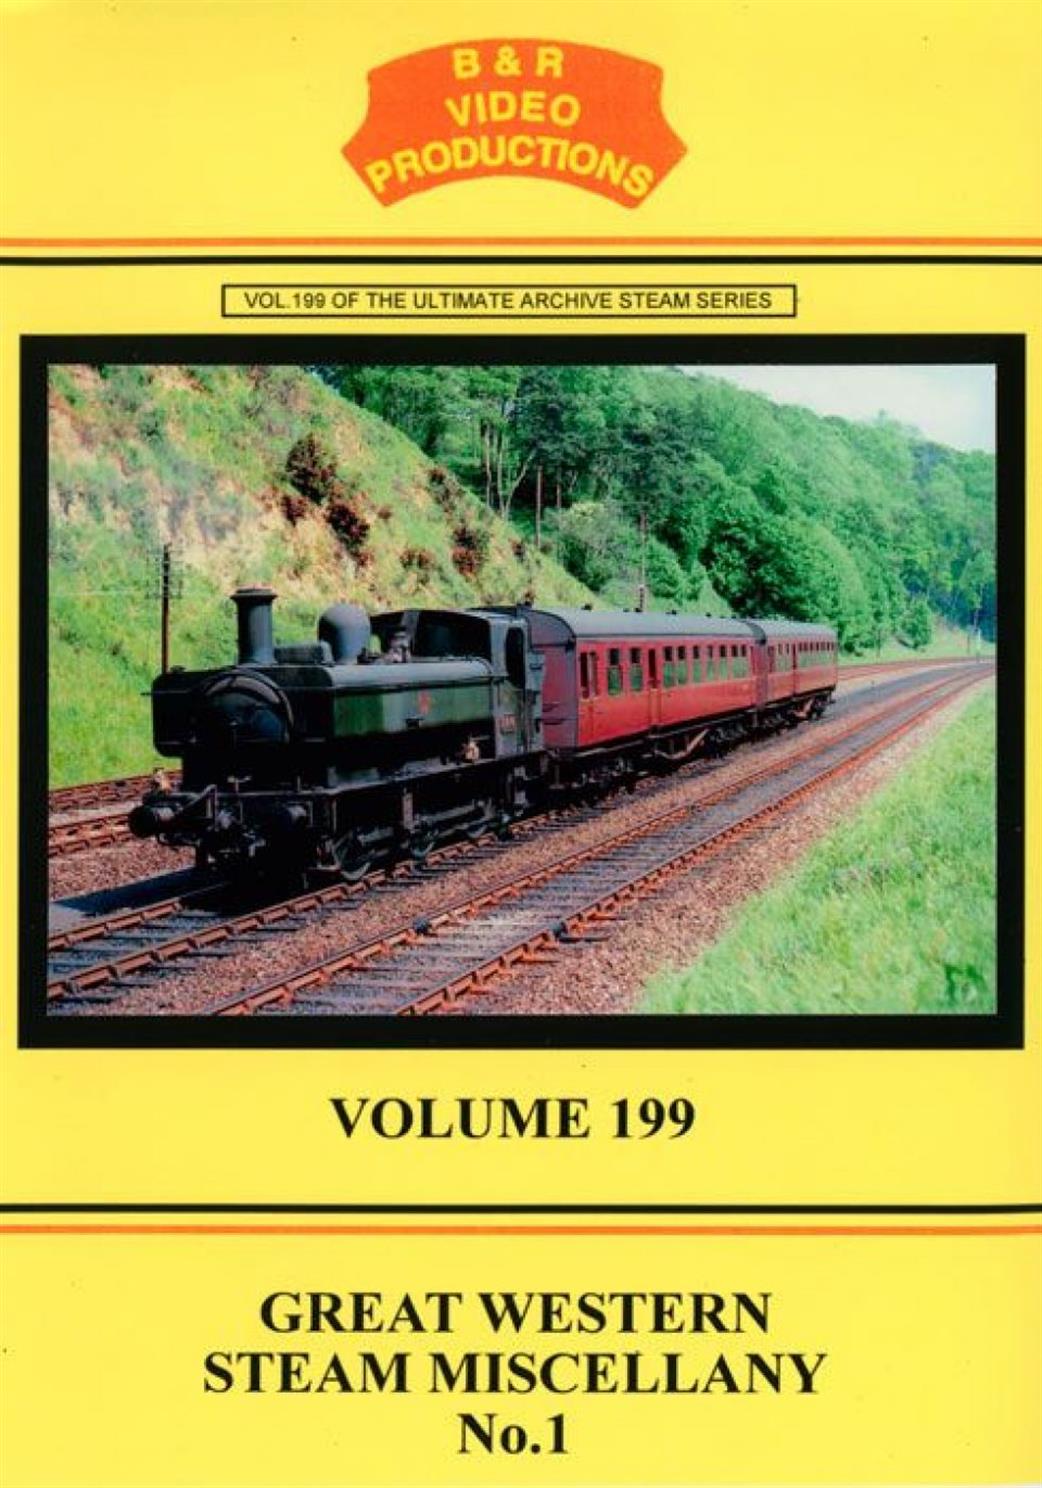 BR1702 Great Western Steam Miscellany Part 1